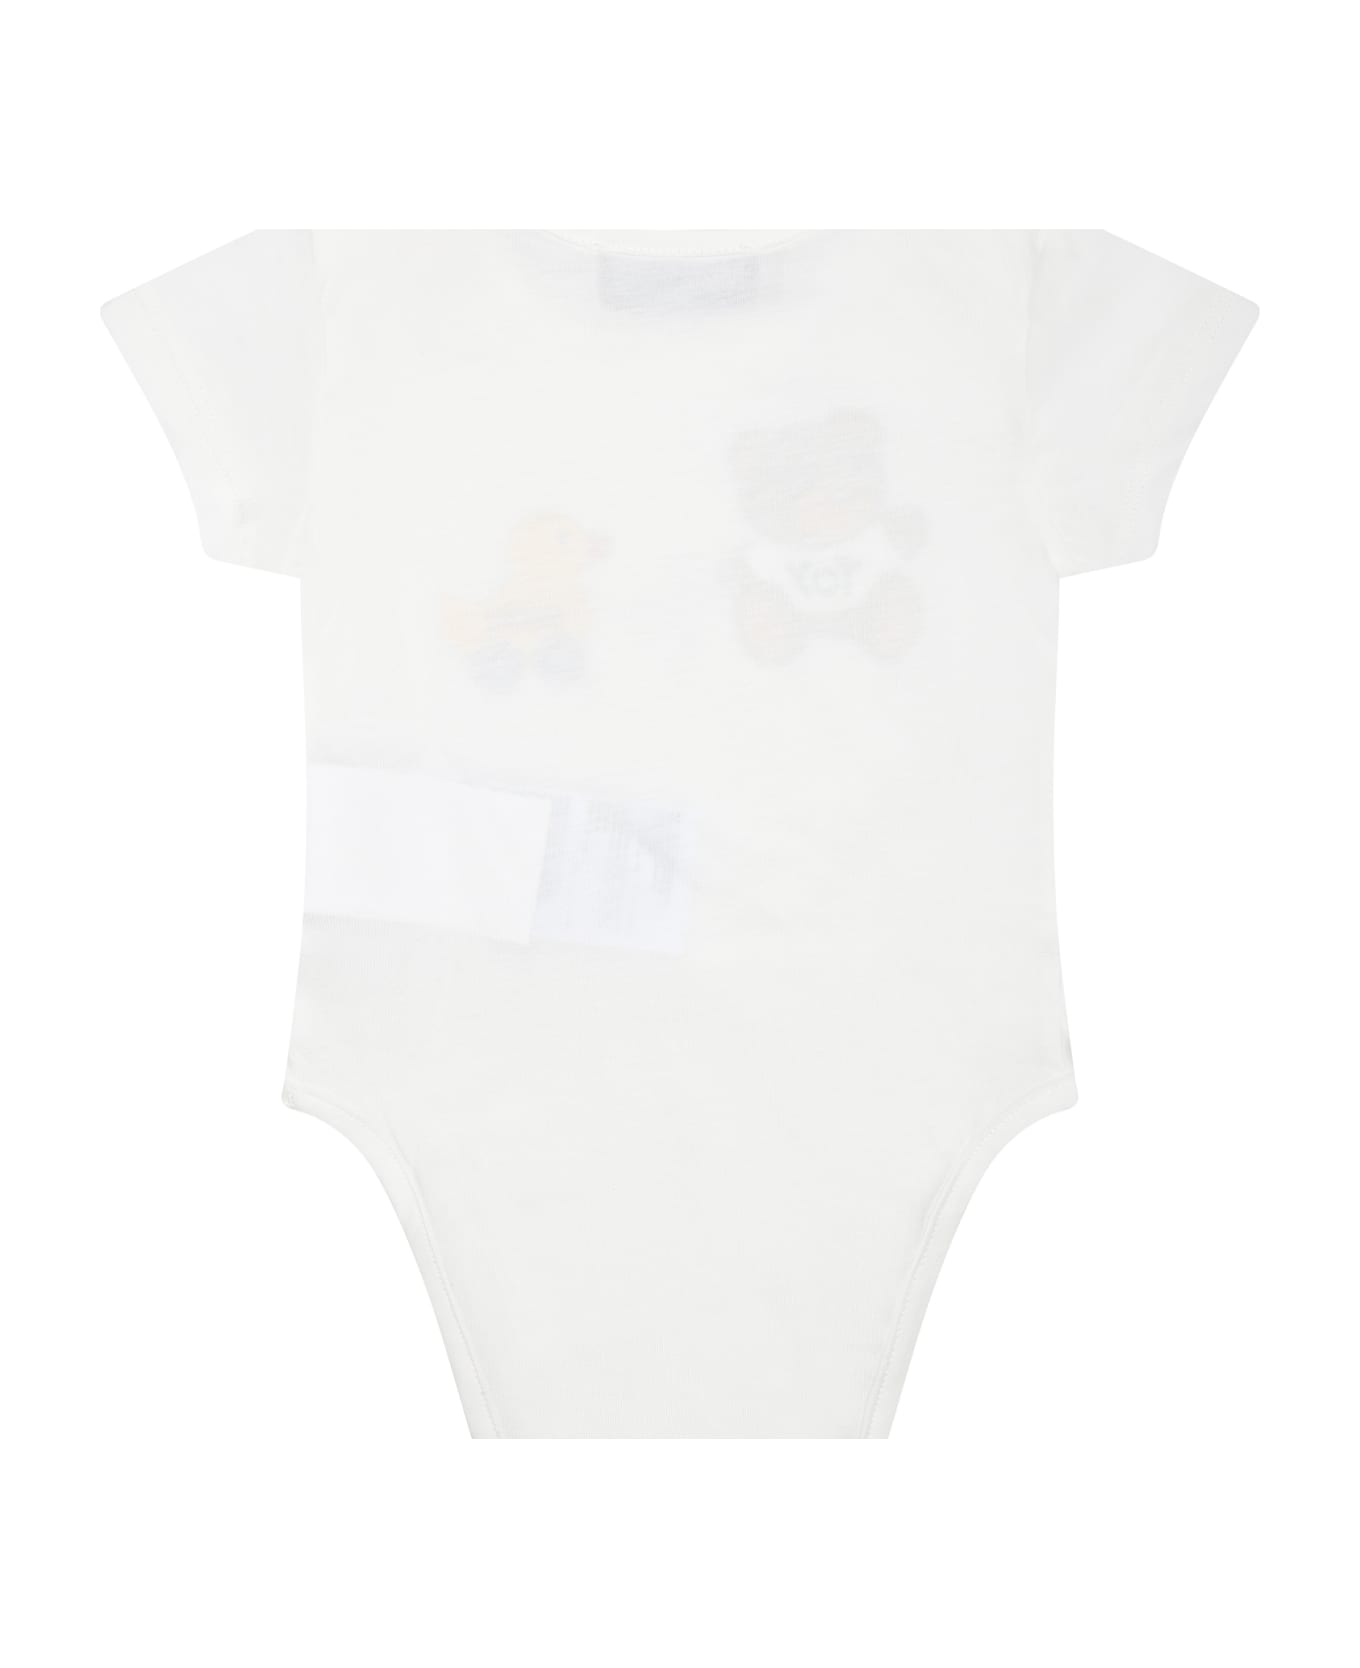 Moschino White Set For Babies With Teddy Bear - White ボディスーツ＆セットアップ